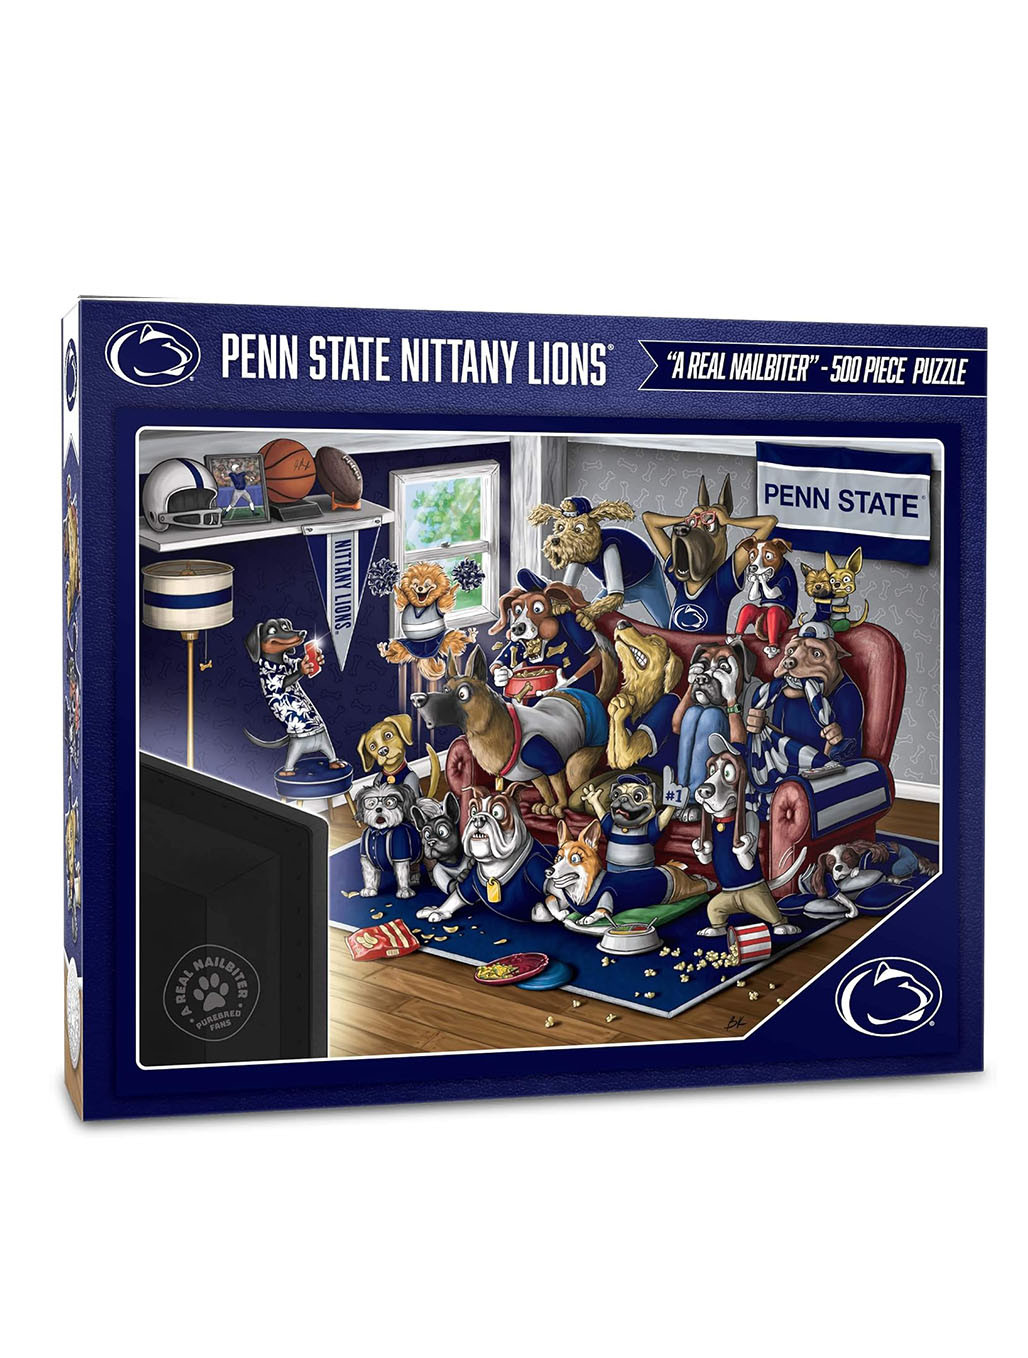 Penn State Dog Puzzle You the Fan Purebred